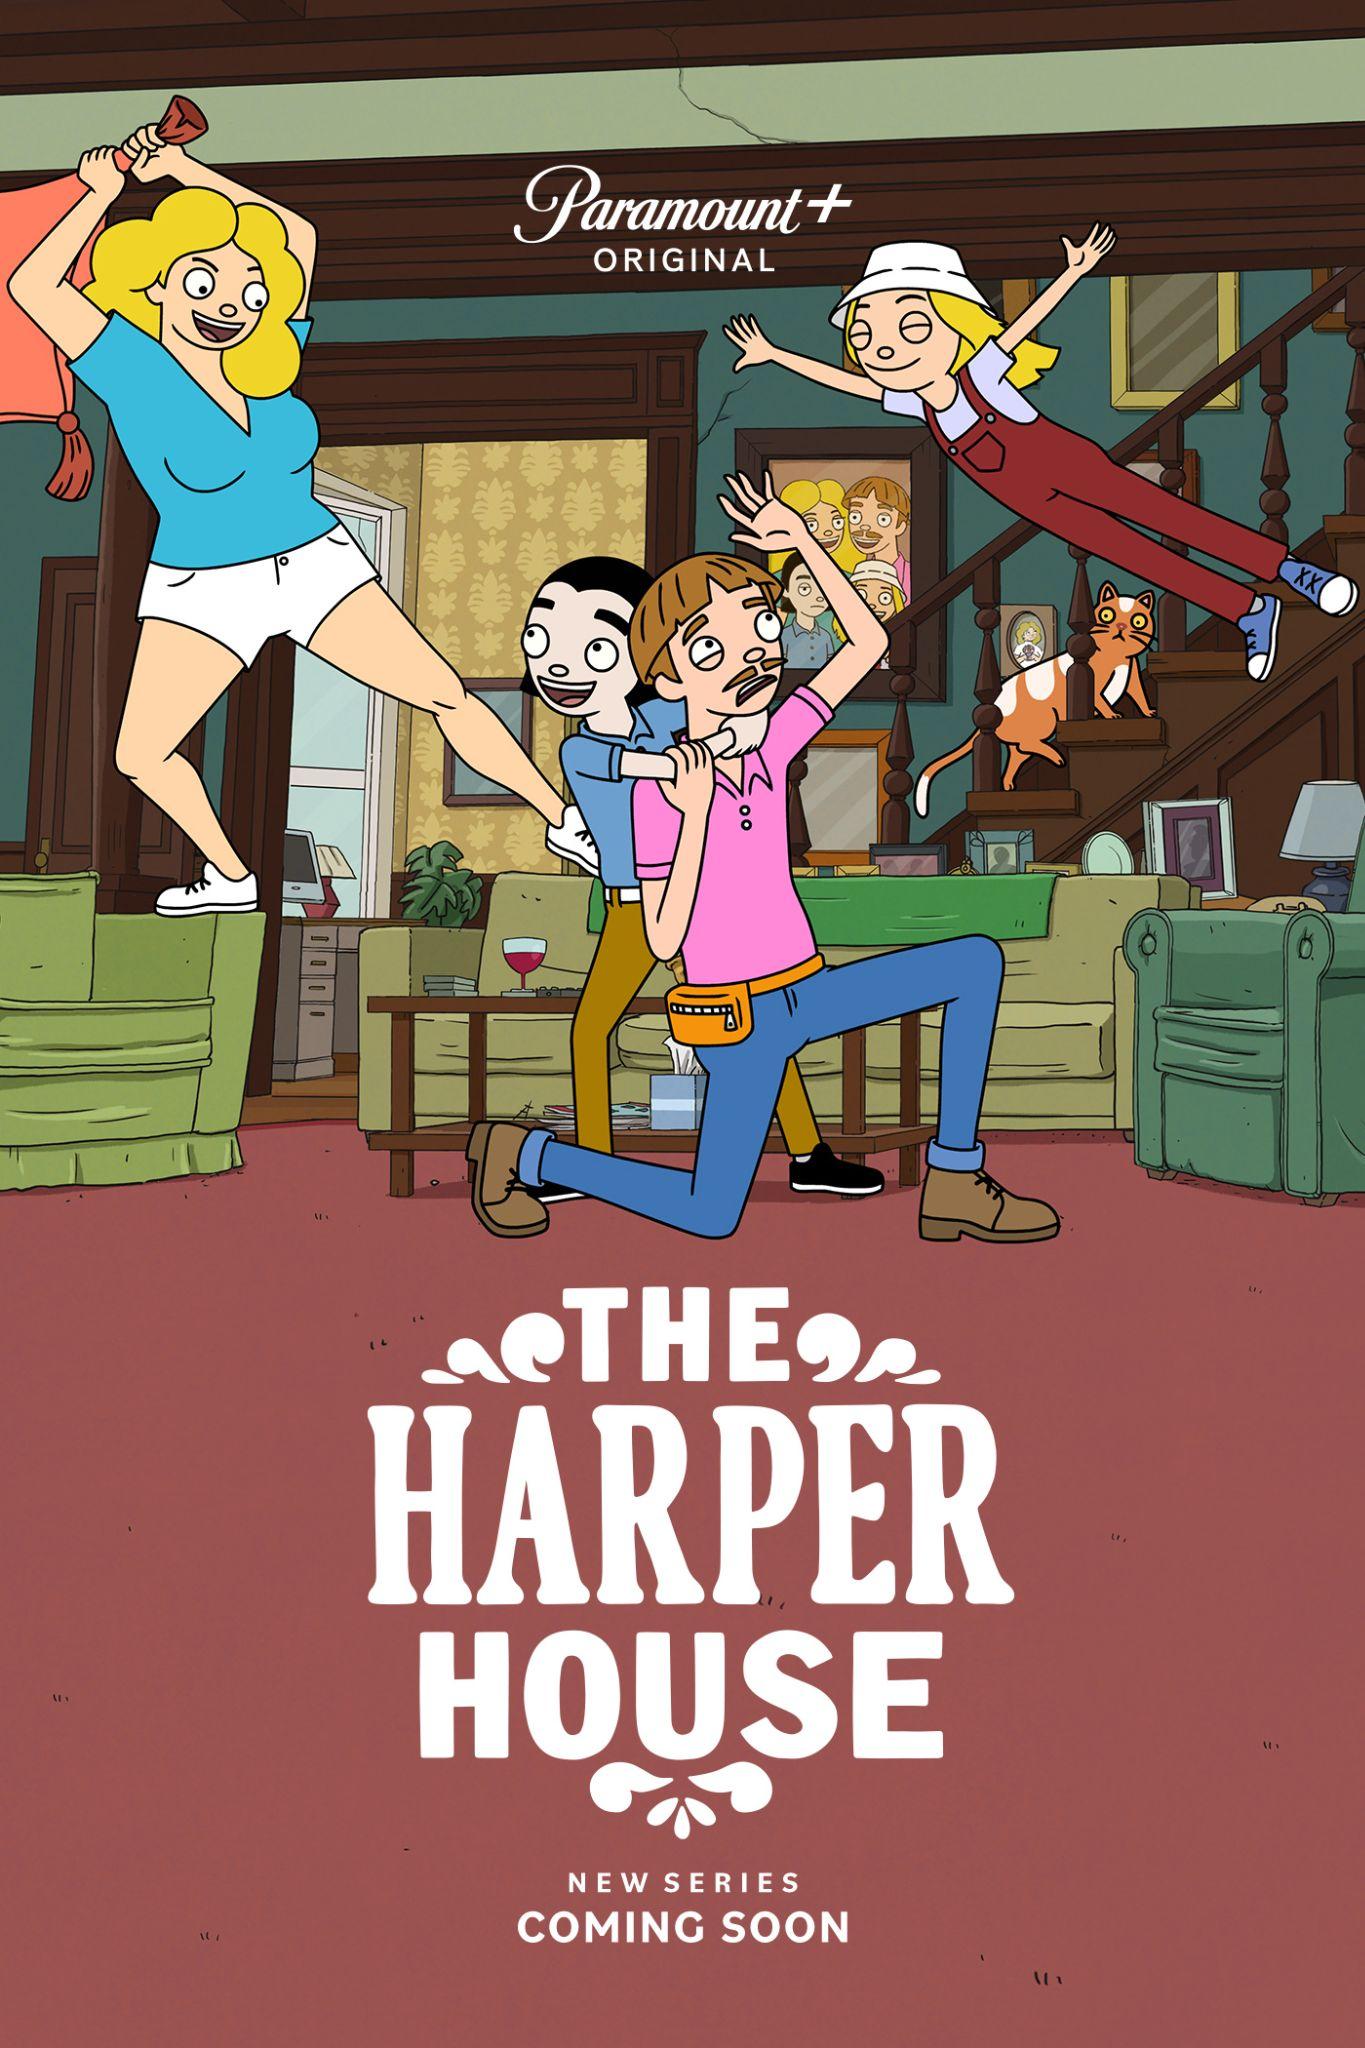 Paramount+ Reveals Teaser Art & Trailer for New Animated Comedy Series “The Harper House”